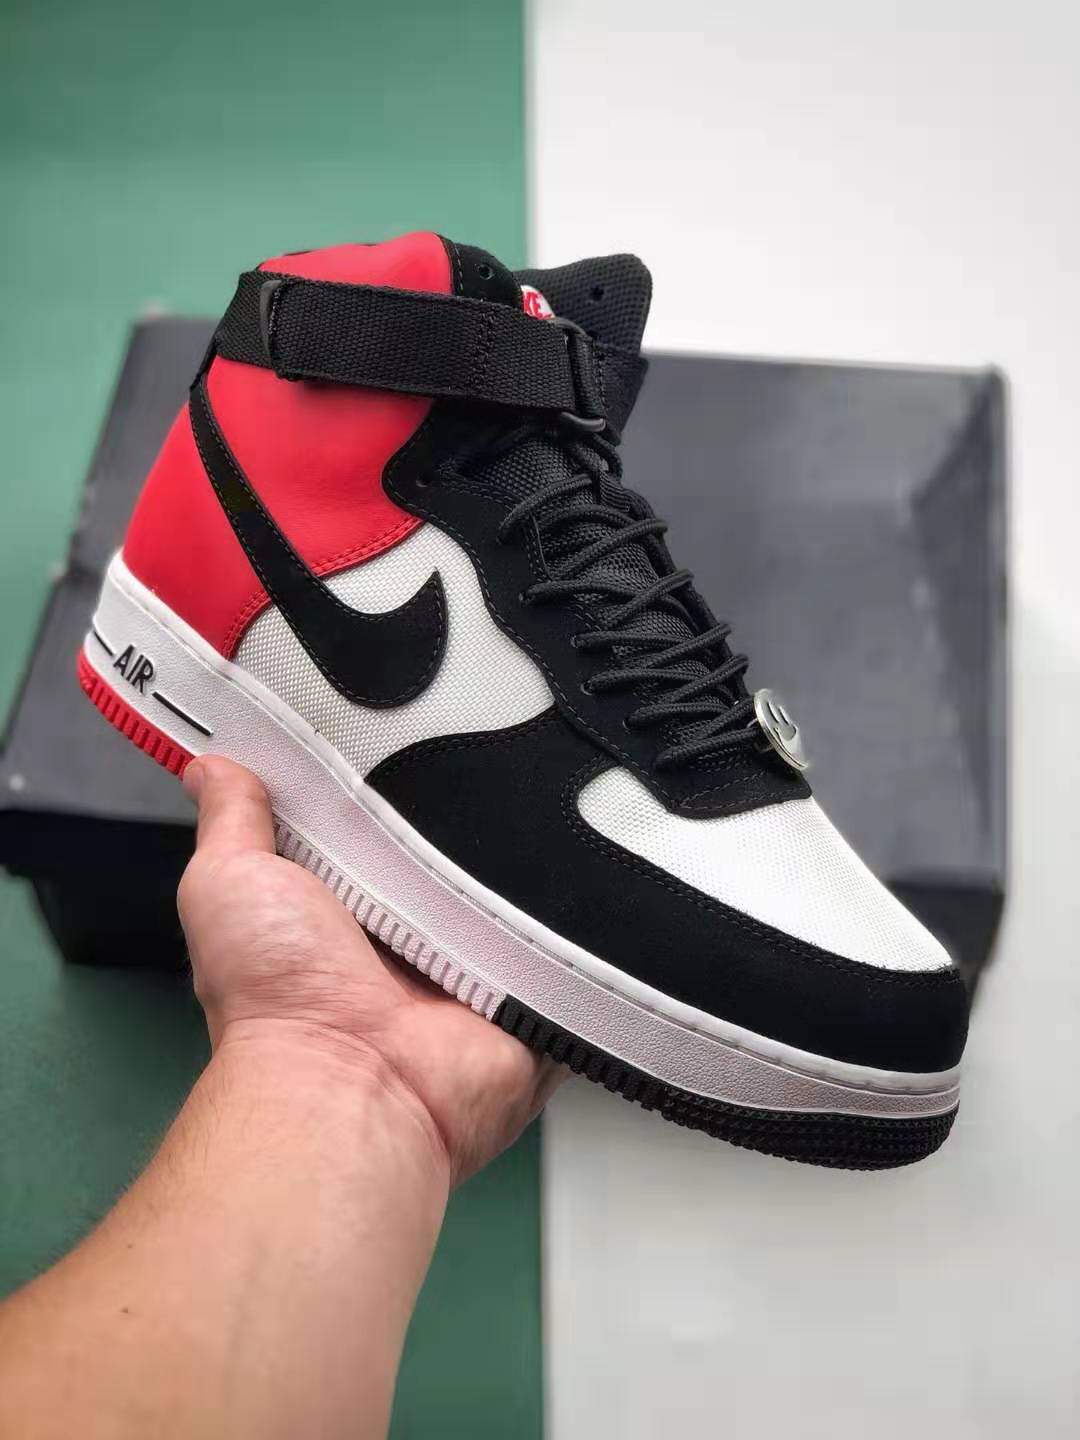 Nike Air Force 1 High 07 LV8 Have a Nike Day Black White Red CI2306-303 - Stylish and Versatile Sneakers